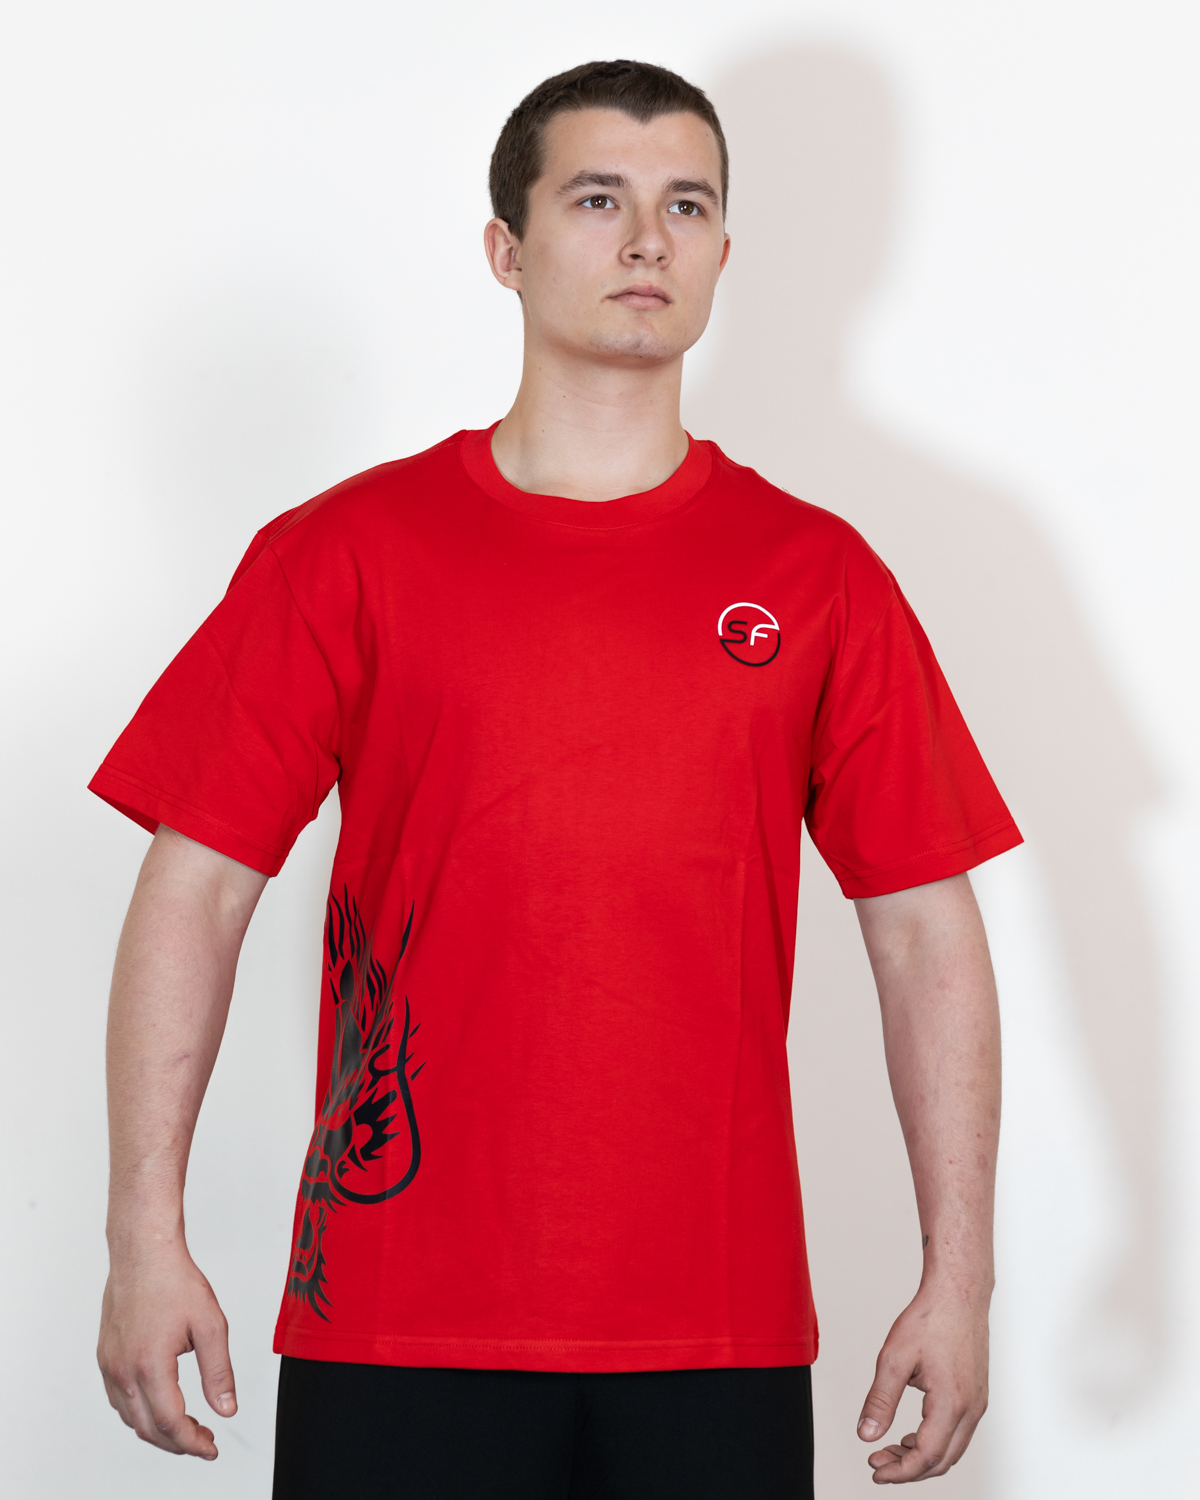 Red SynergyFiit Dragon T-Shirt